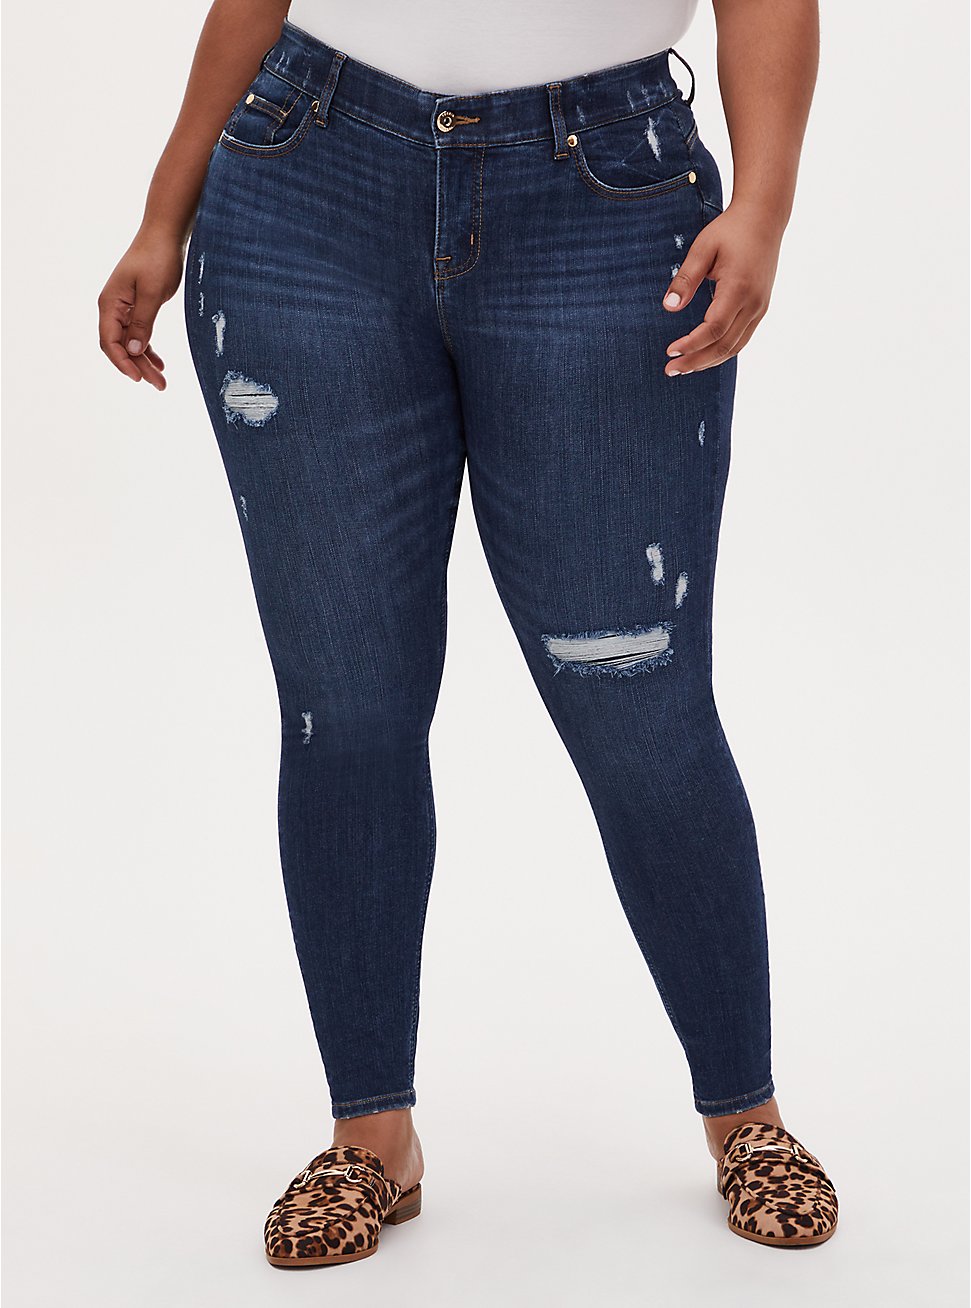 Plus Size - Bombshell Skinny Premium Stretch High-Rise Destructed Jean